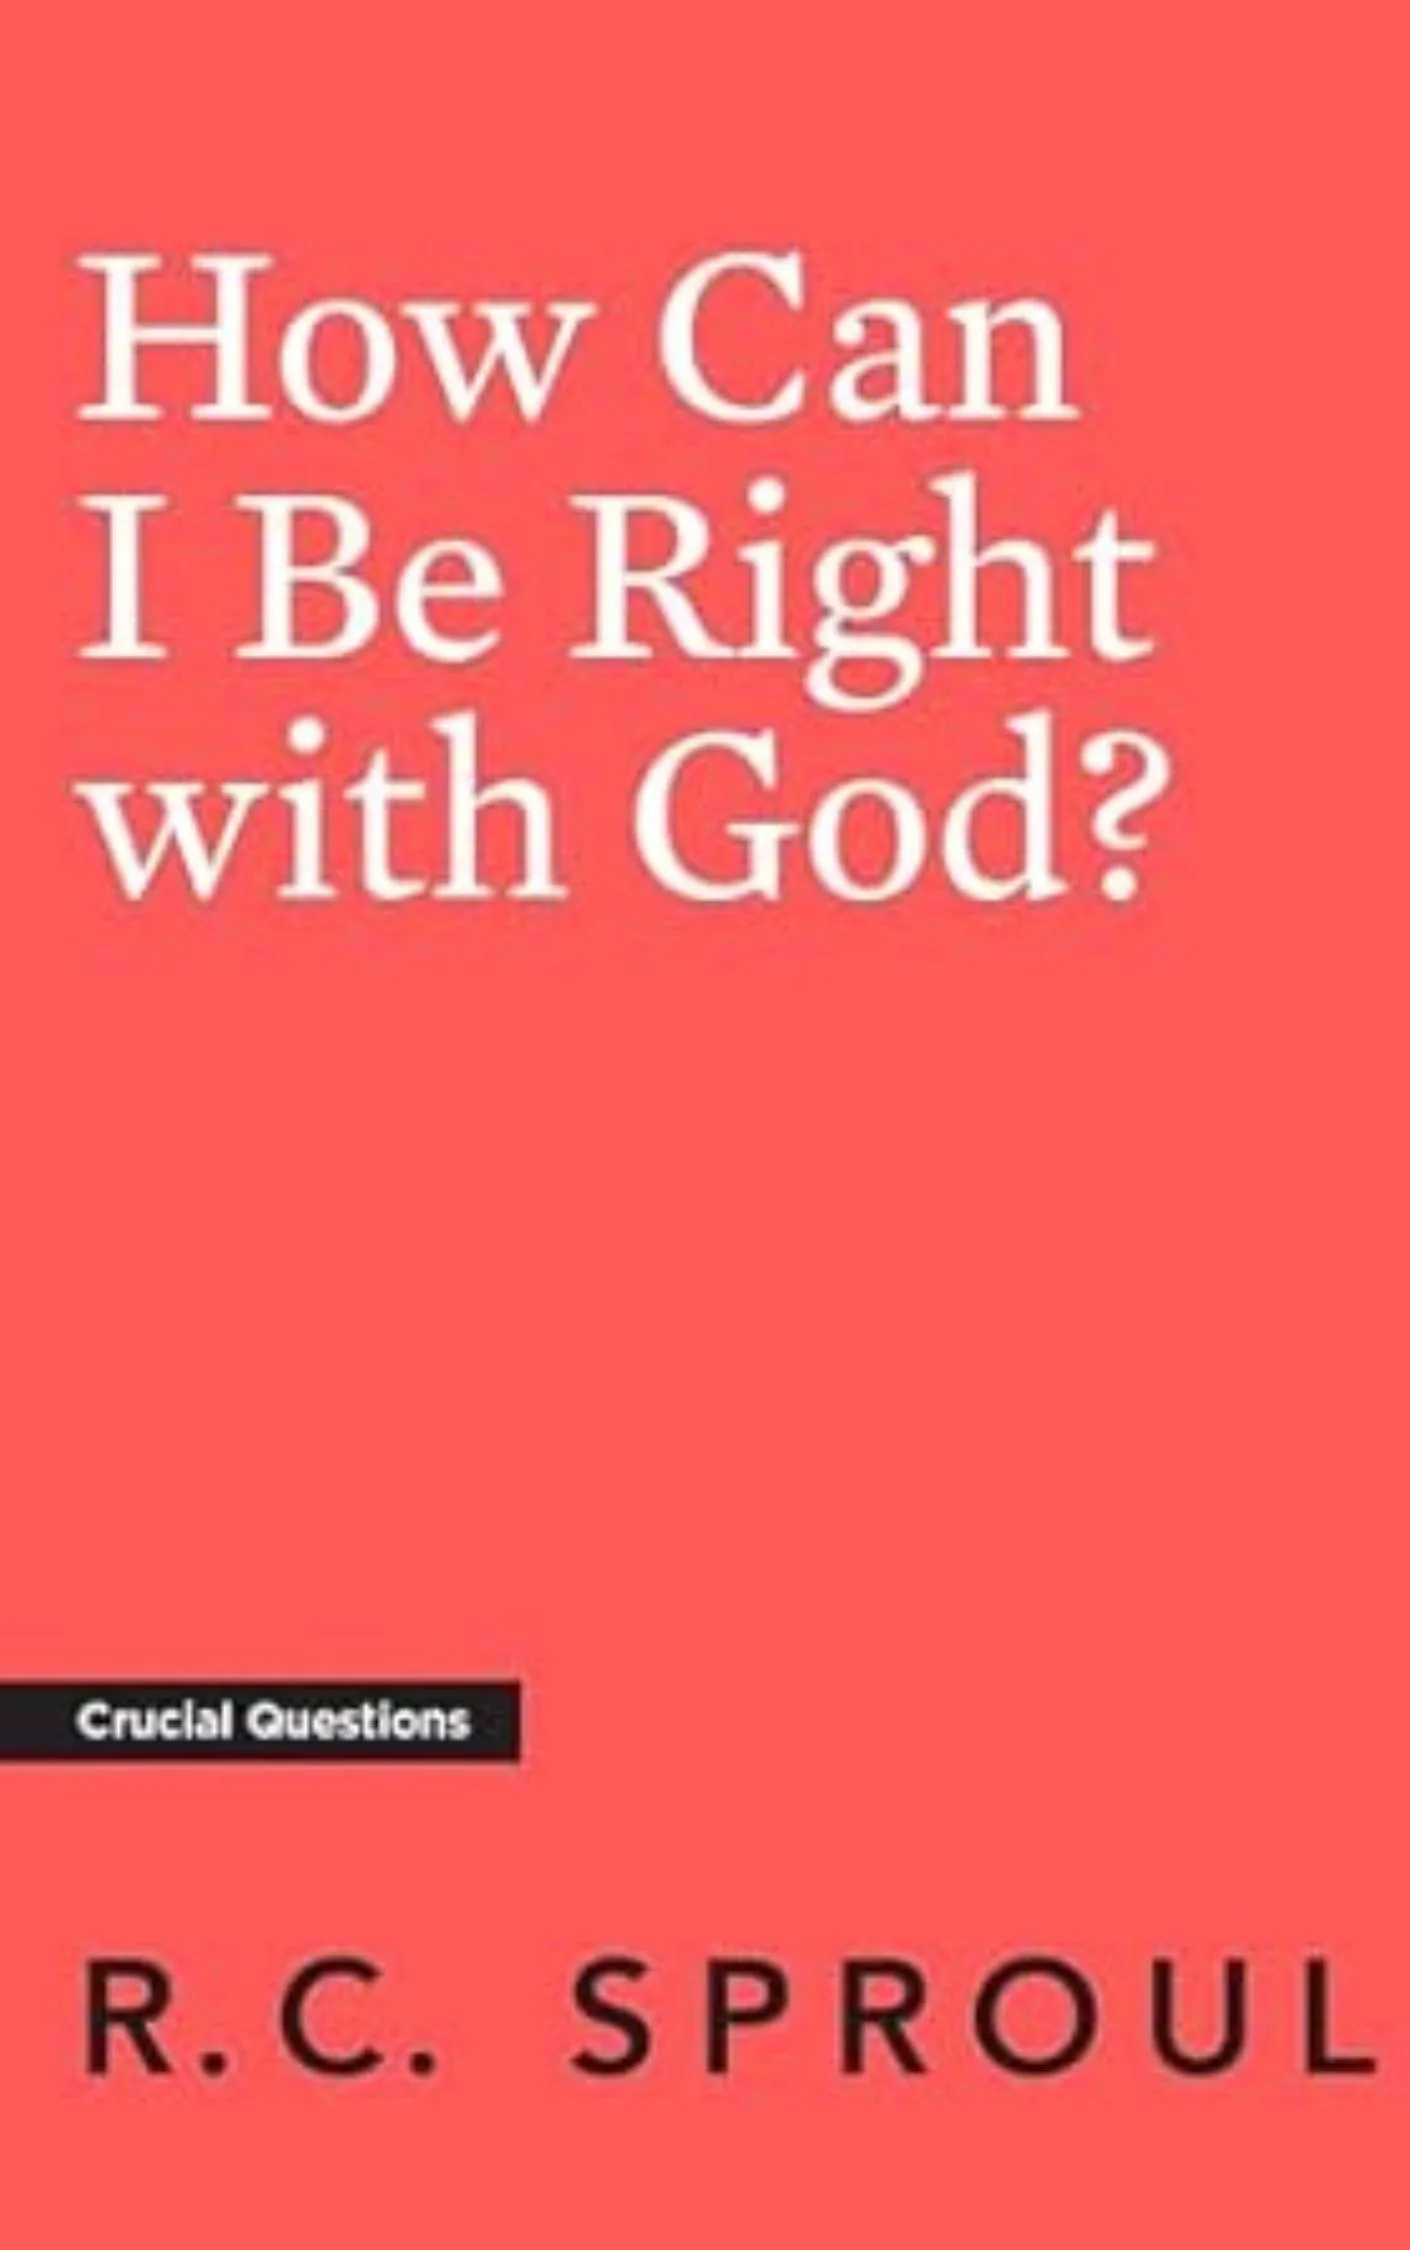 How Can I Be Right with God? by R. C. Sproul